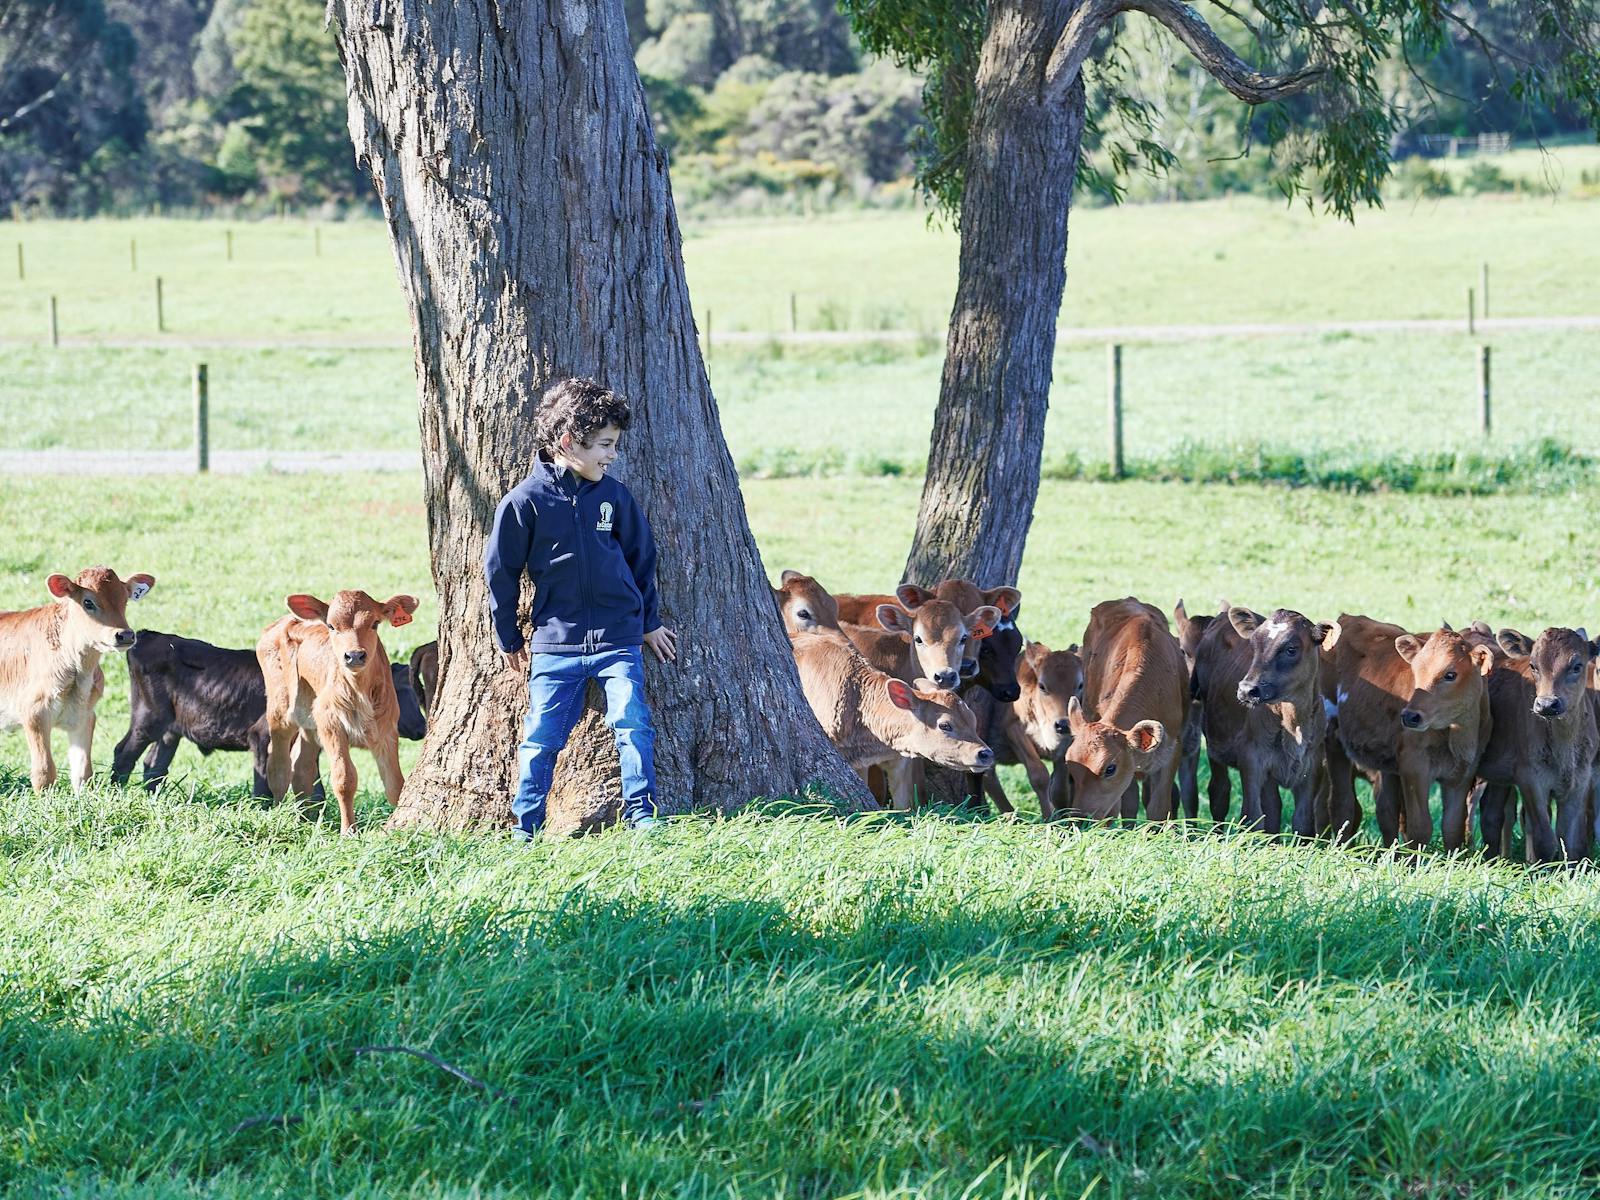 A little boy hiding behind a tree, playing with young calves.